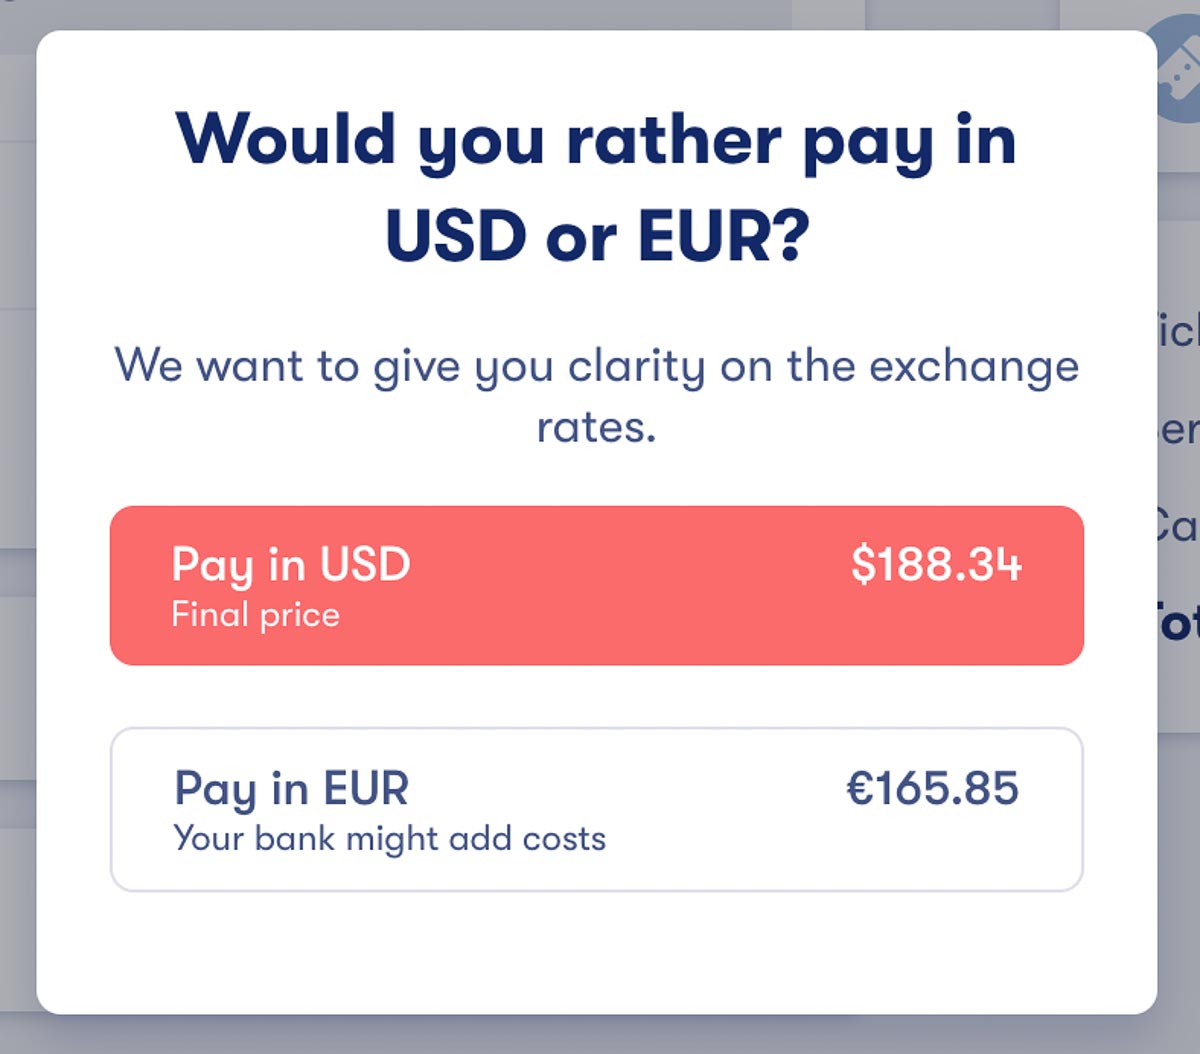 Omio lets you choose the currency you want to pay in when booking bus, ferry, or train tickets in Europe or other countries. This can help you save money on foreign transaction fees.